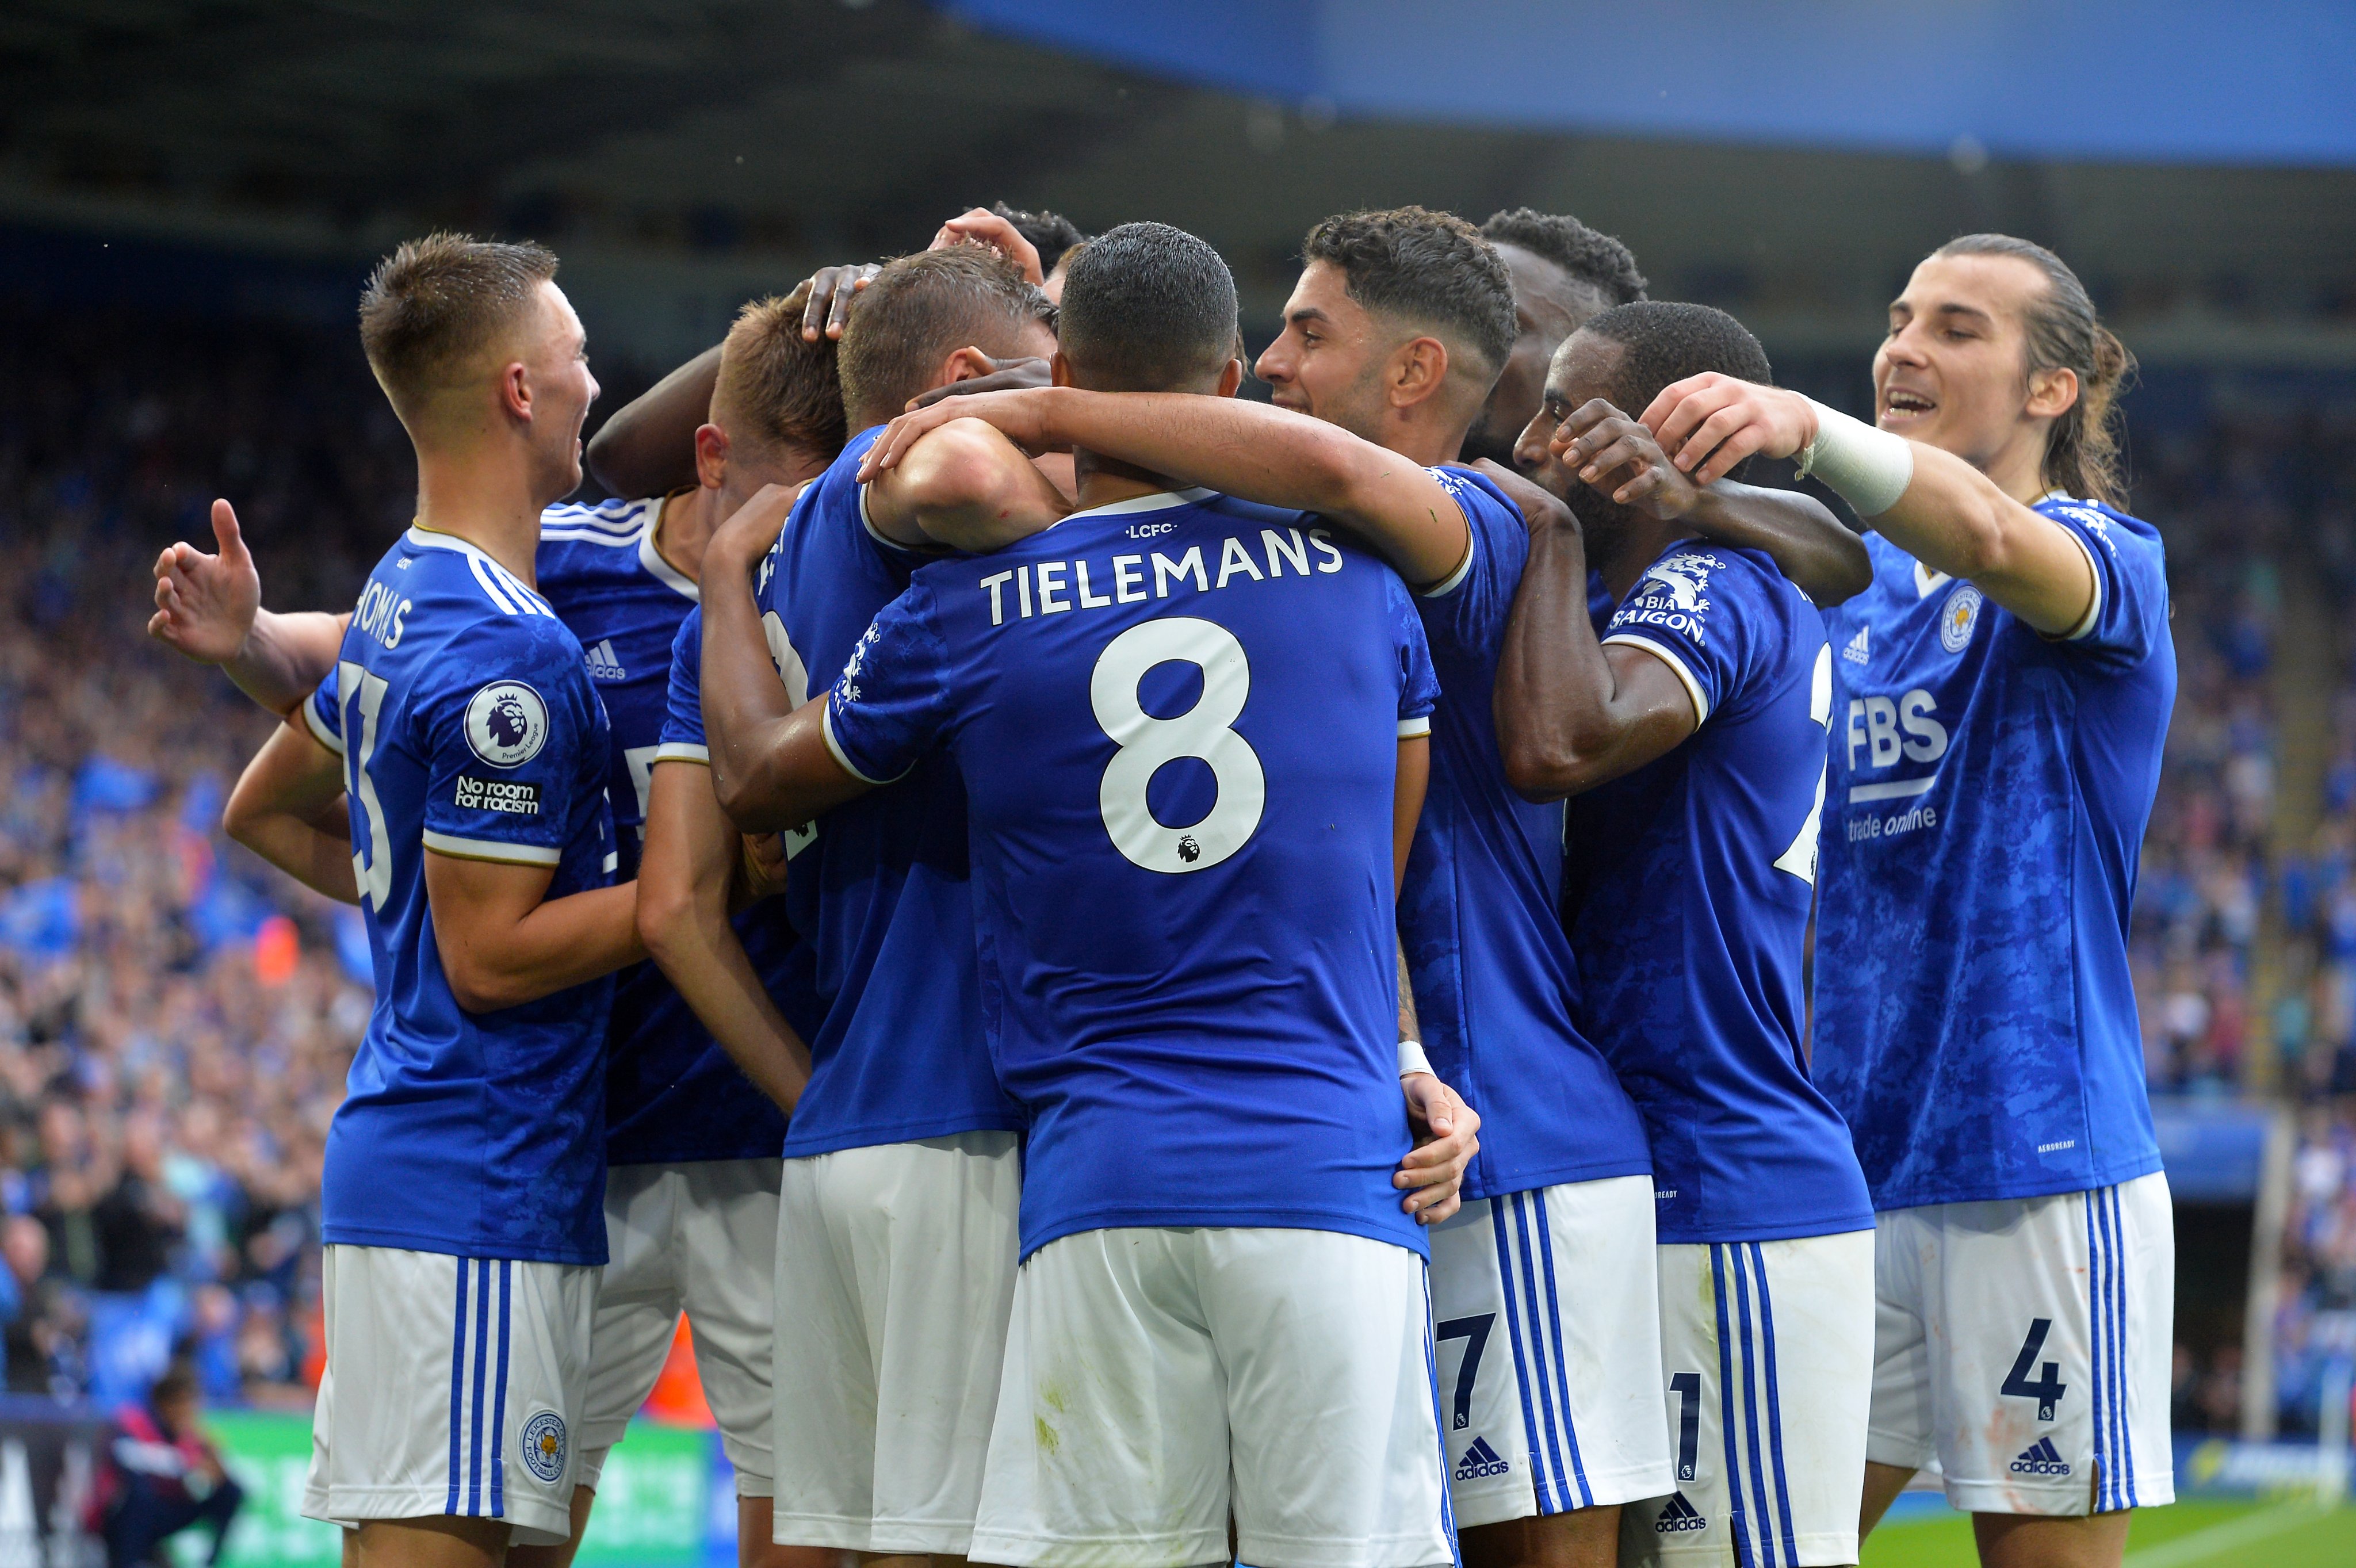 This summer reflects on where Leicester City are as team and club, proclaims Brendan Rodgers